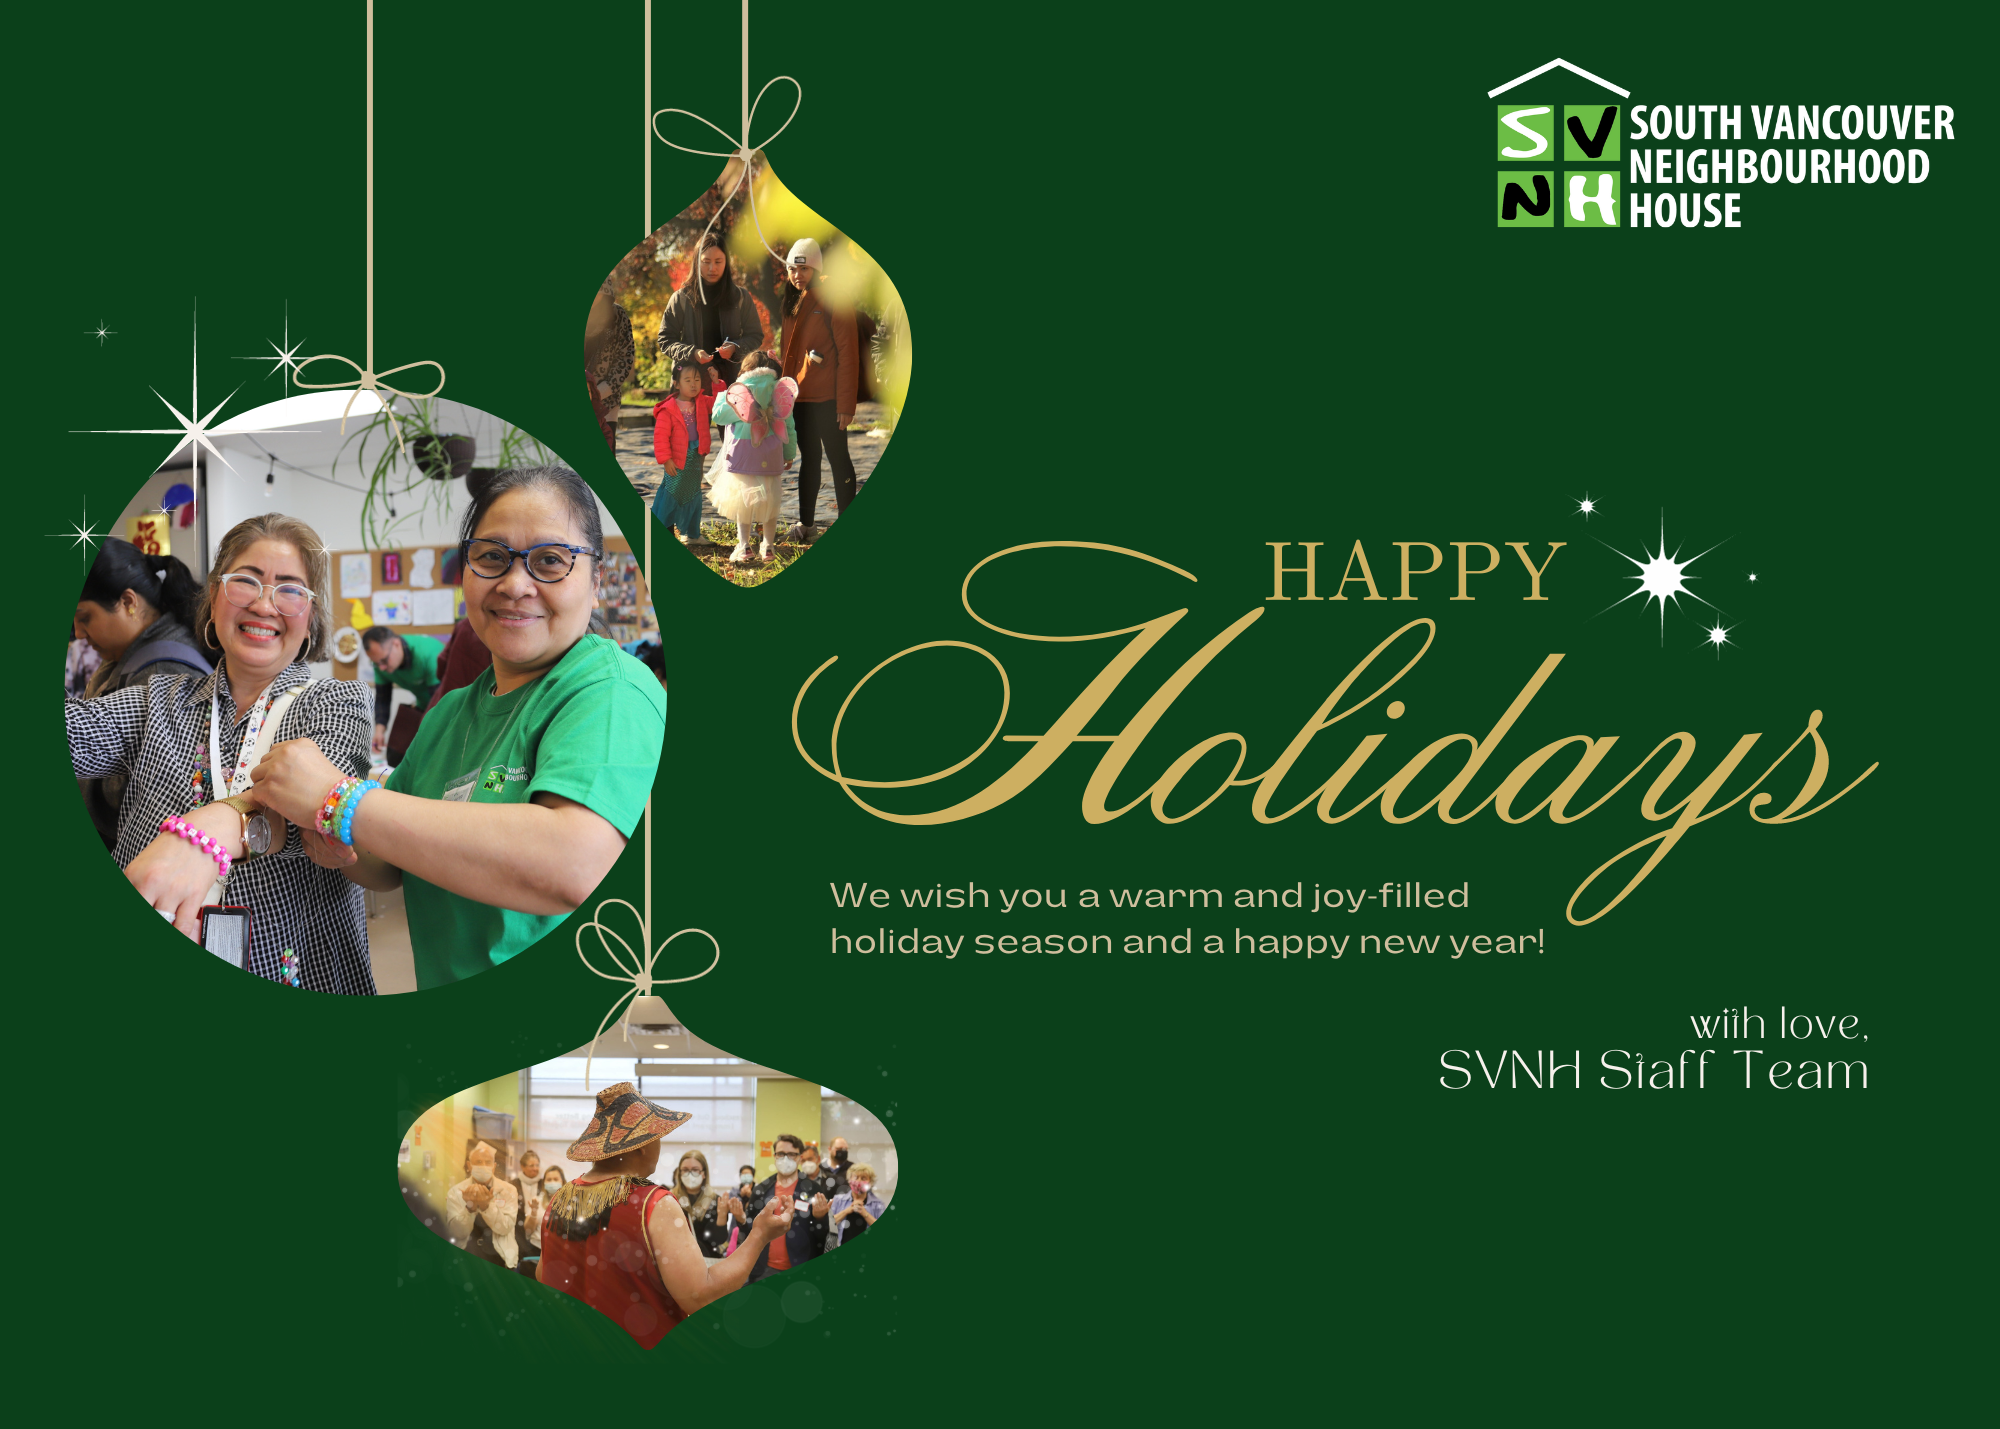 SVNH Holiday Closures – December 25 to January 1st